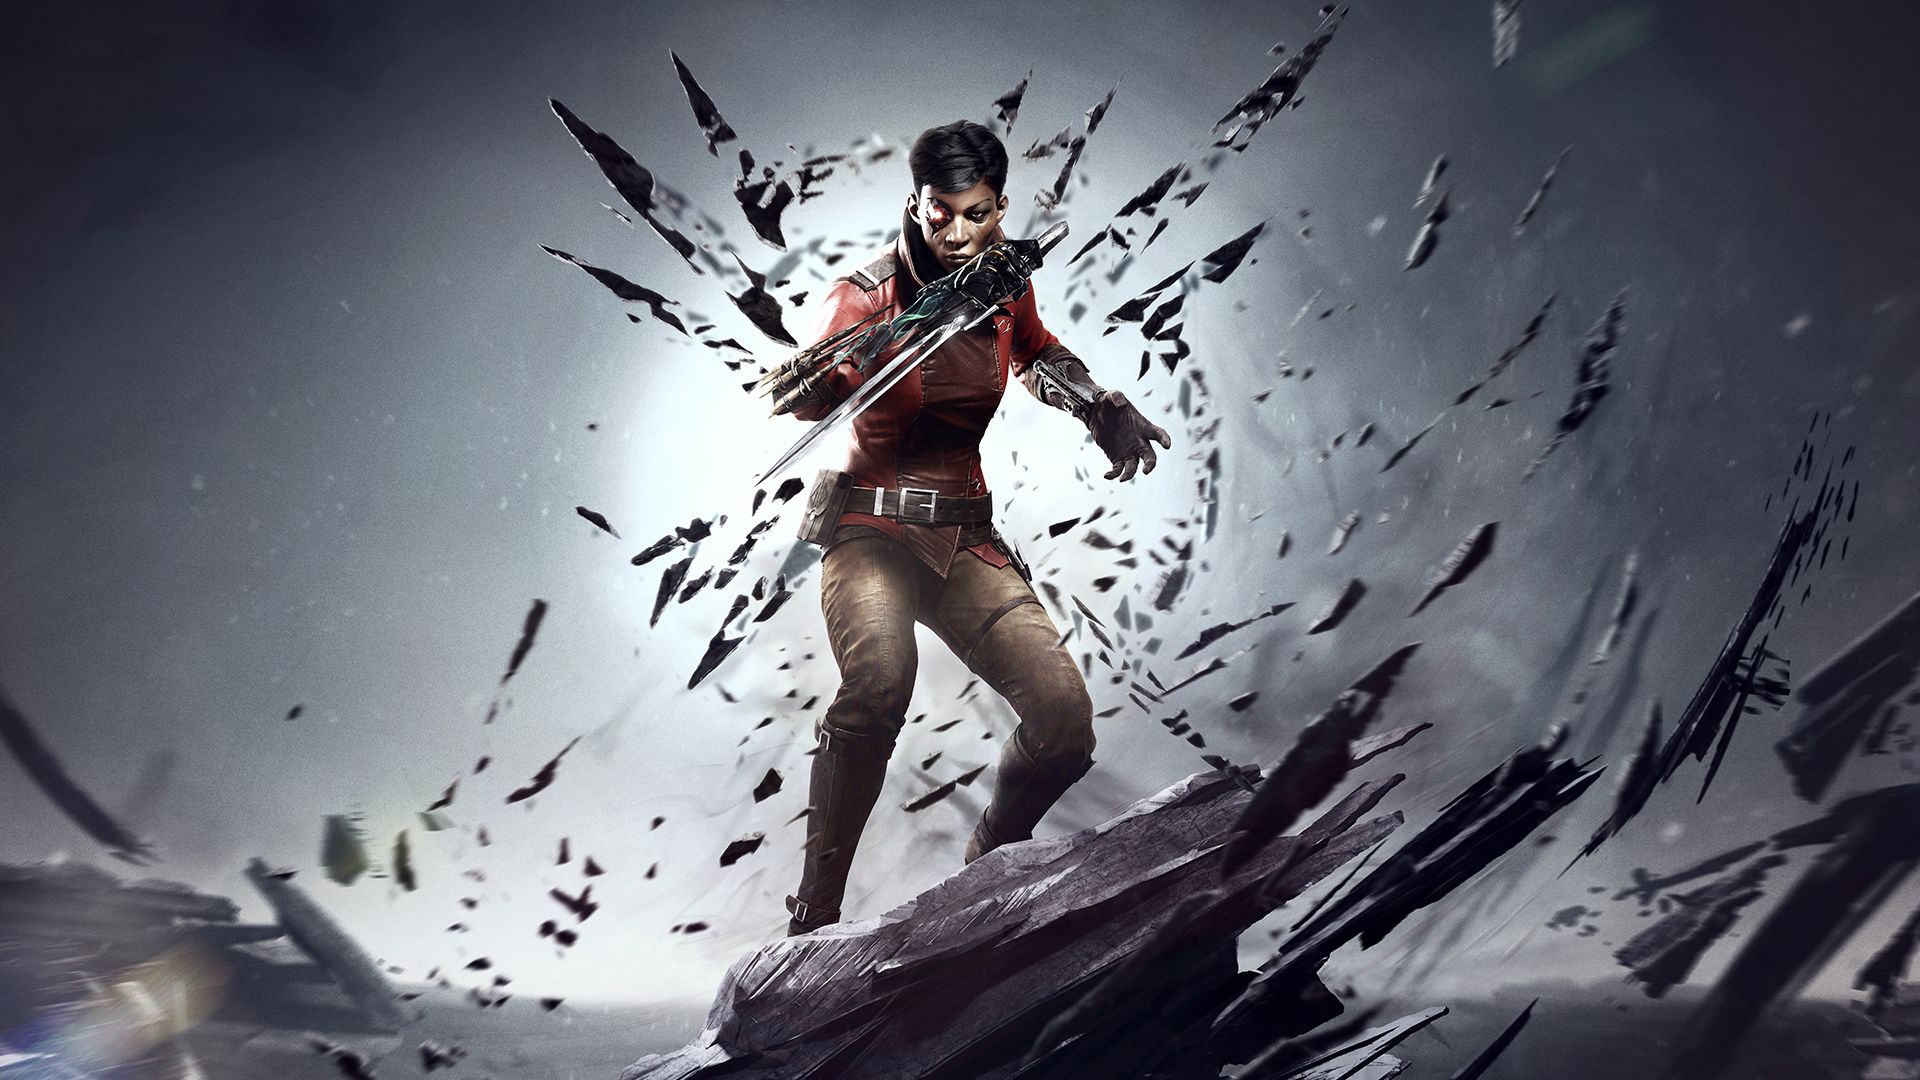 Billie Lurk is a Black woman with short black hair, one eye is covered by a sort of eye patch. She wears a red jacket, black belt, and brown pants. She's holding some sort of weapon in her right hand. She's standing on a rock that breaks off into floating pieces around and behind her.